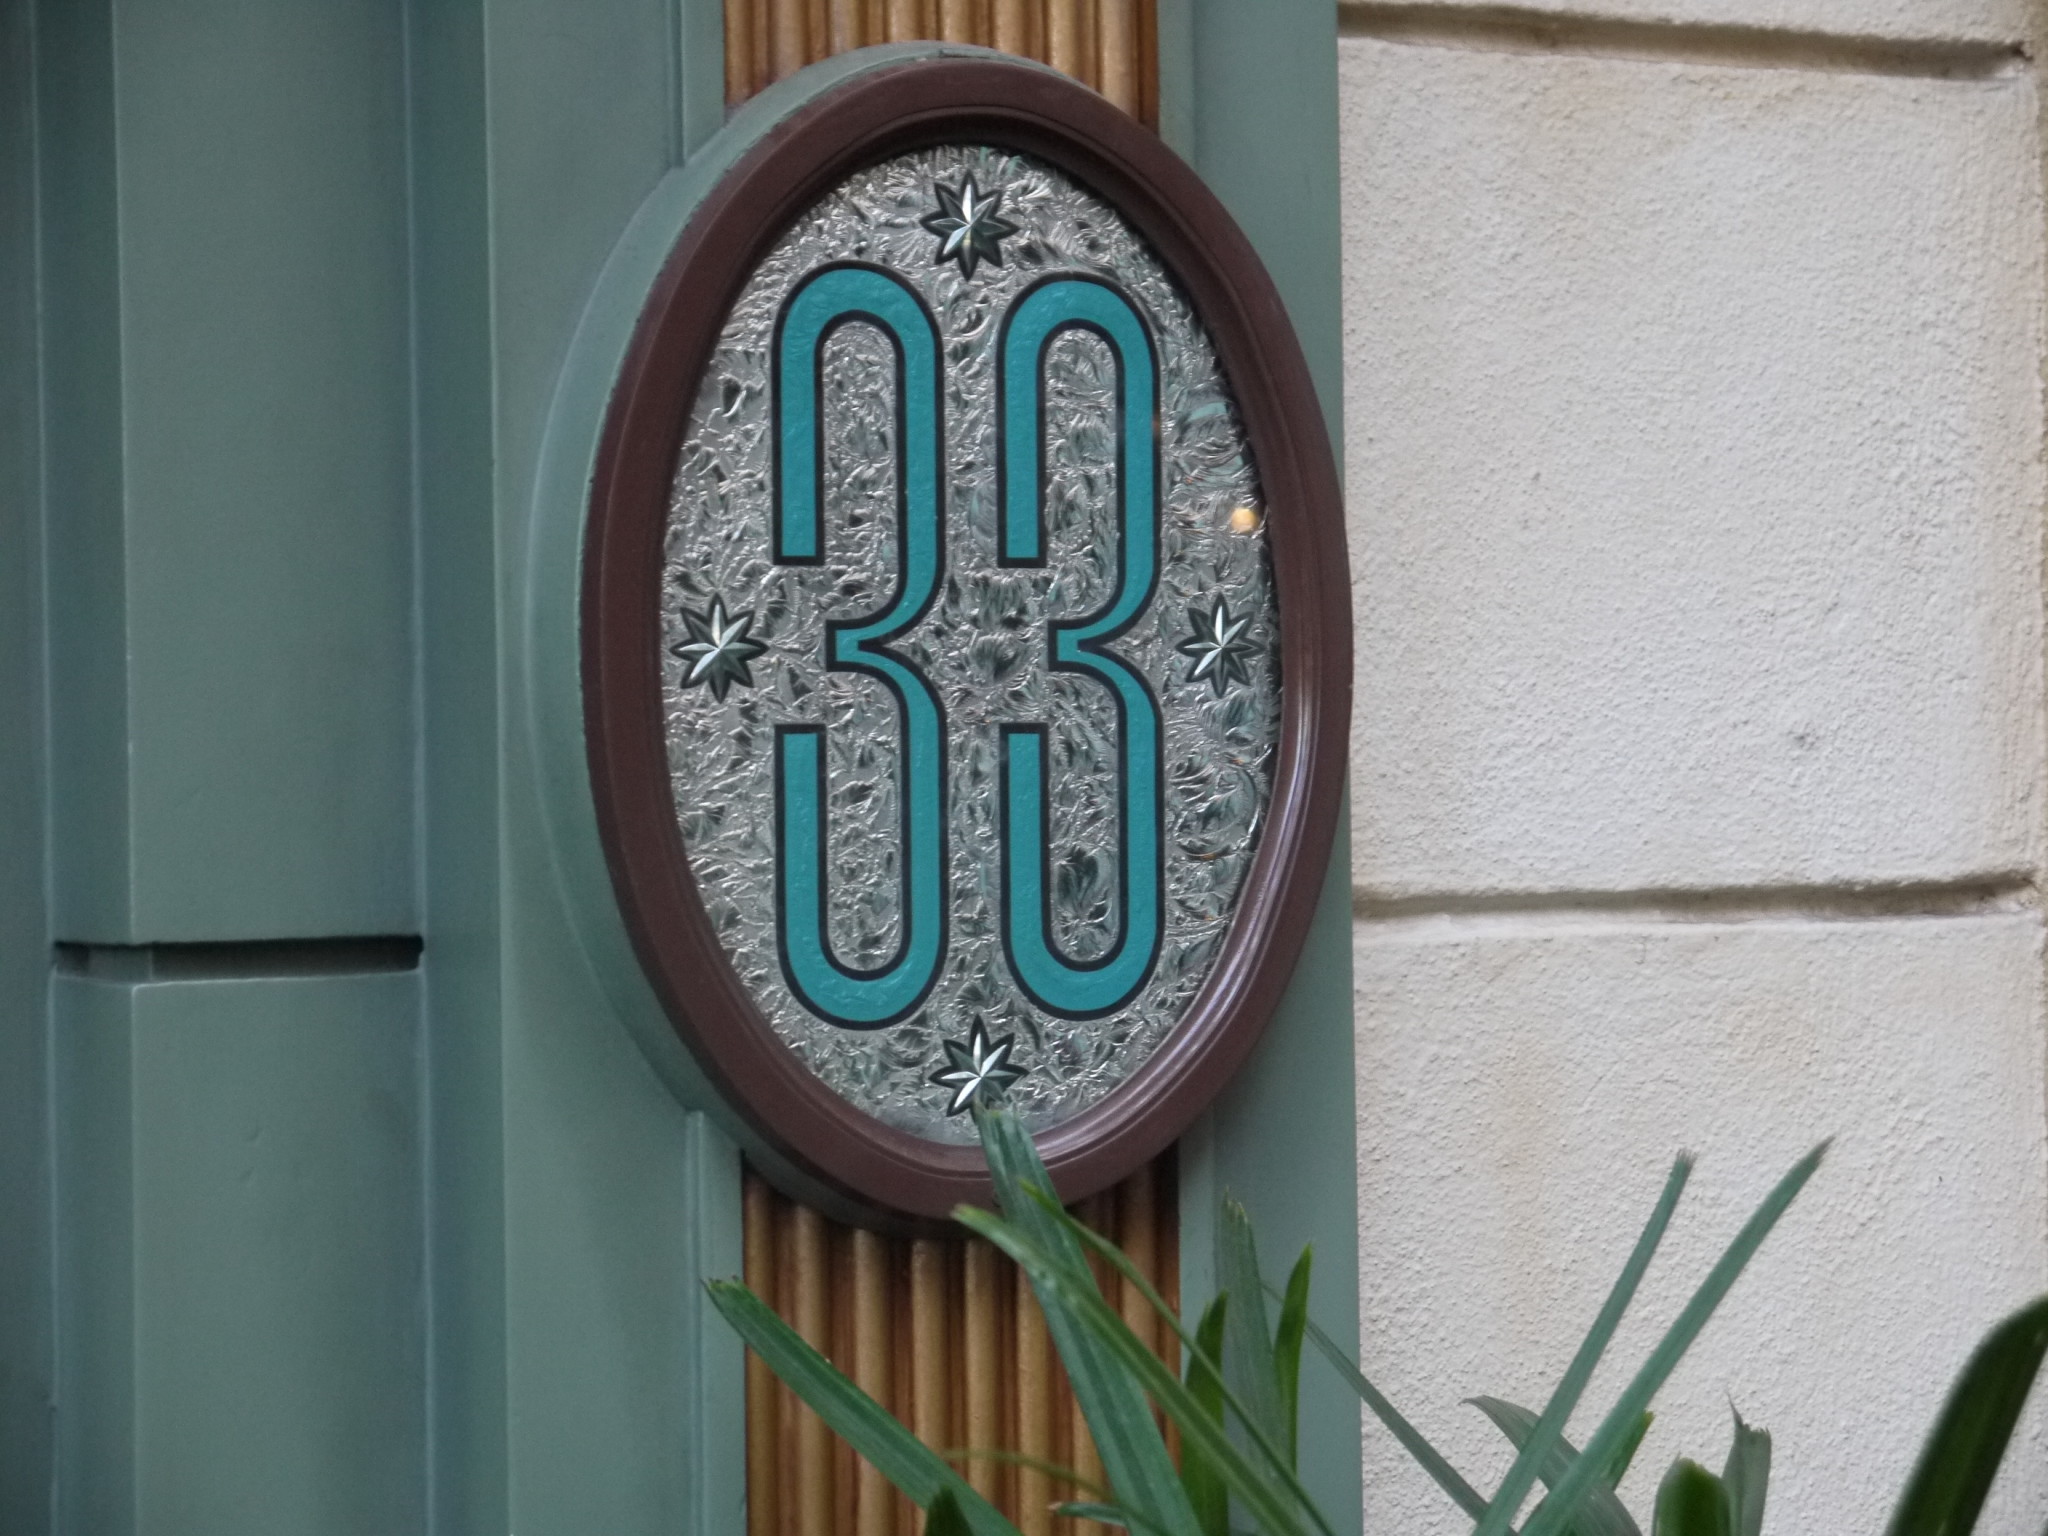 Another Email Update Sent to Those That Have Inquired About a Club 33 Membership at Walt Disney World